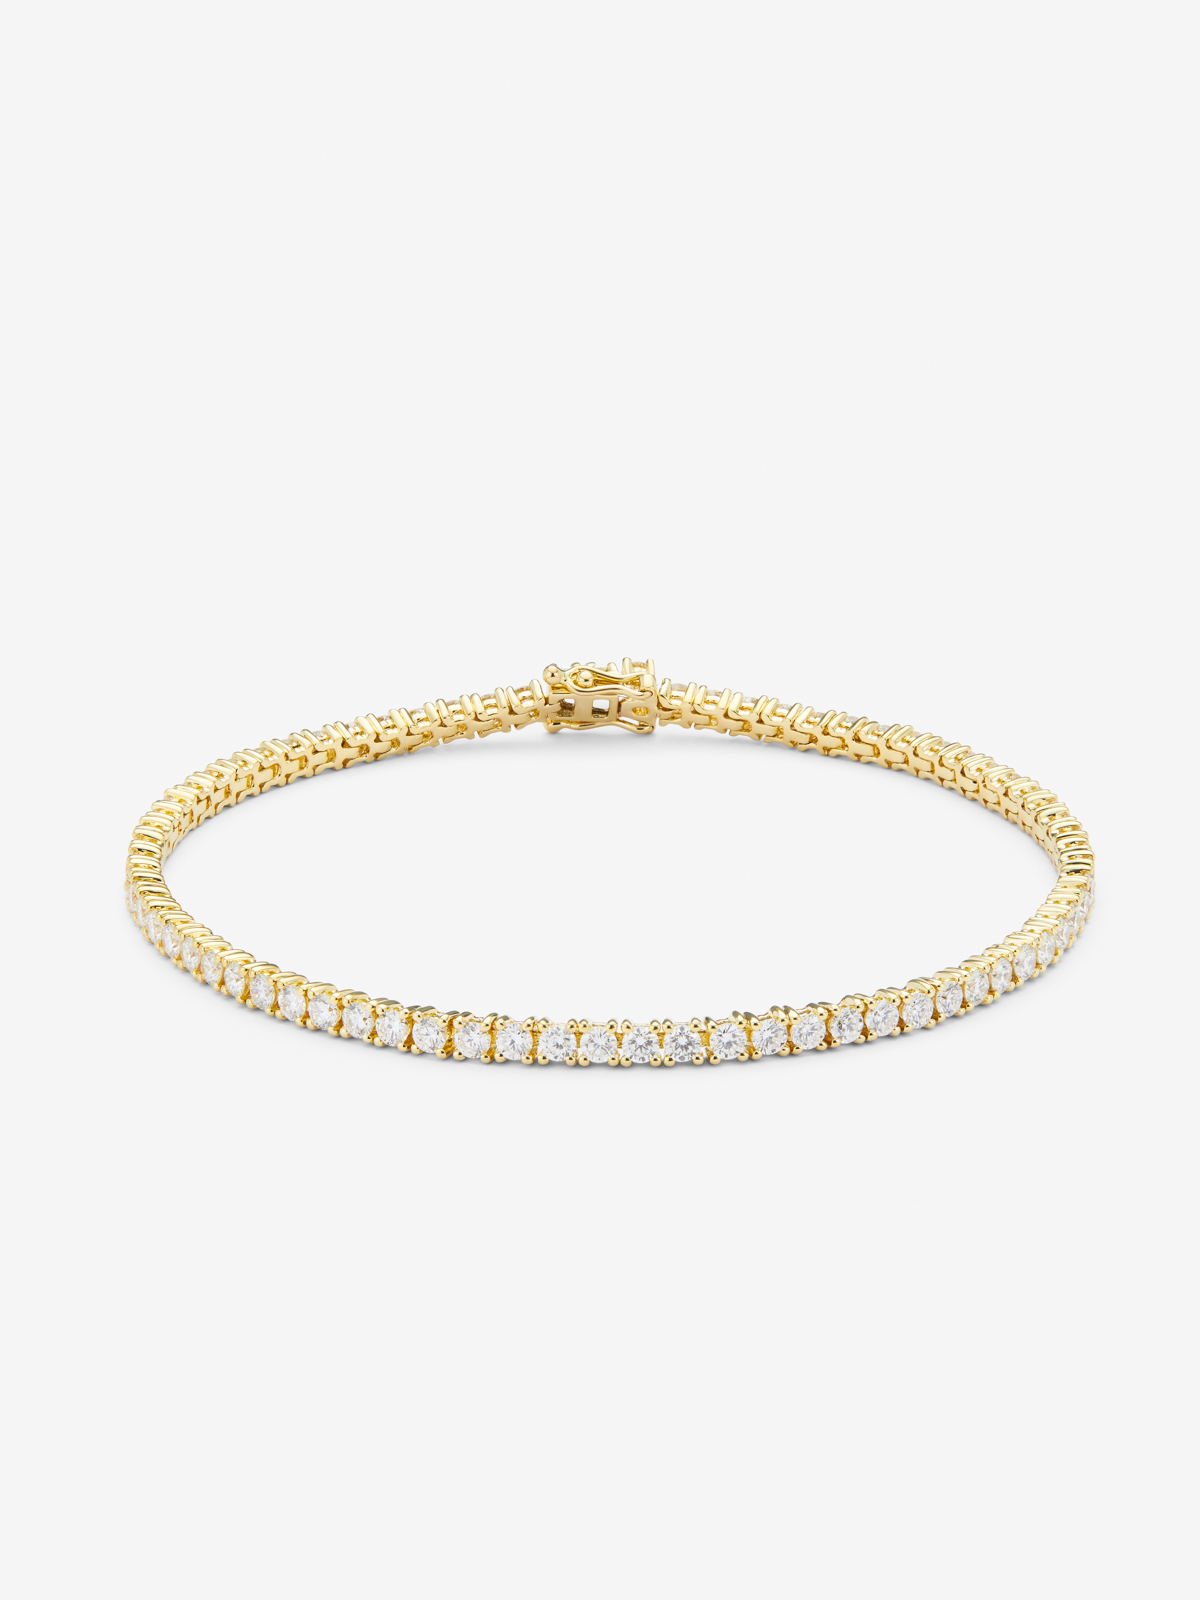 18K yellow gold rivière bracelet with bright type size of 3.11 cts